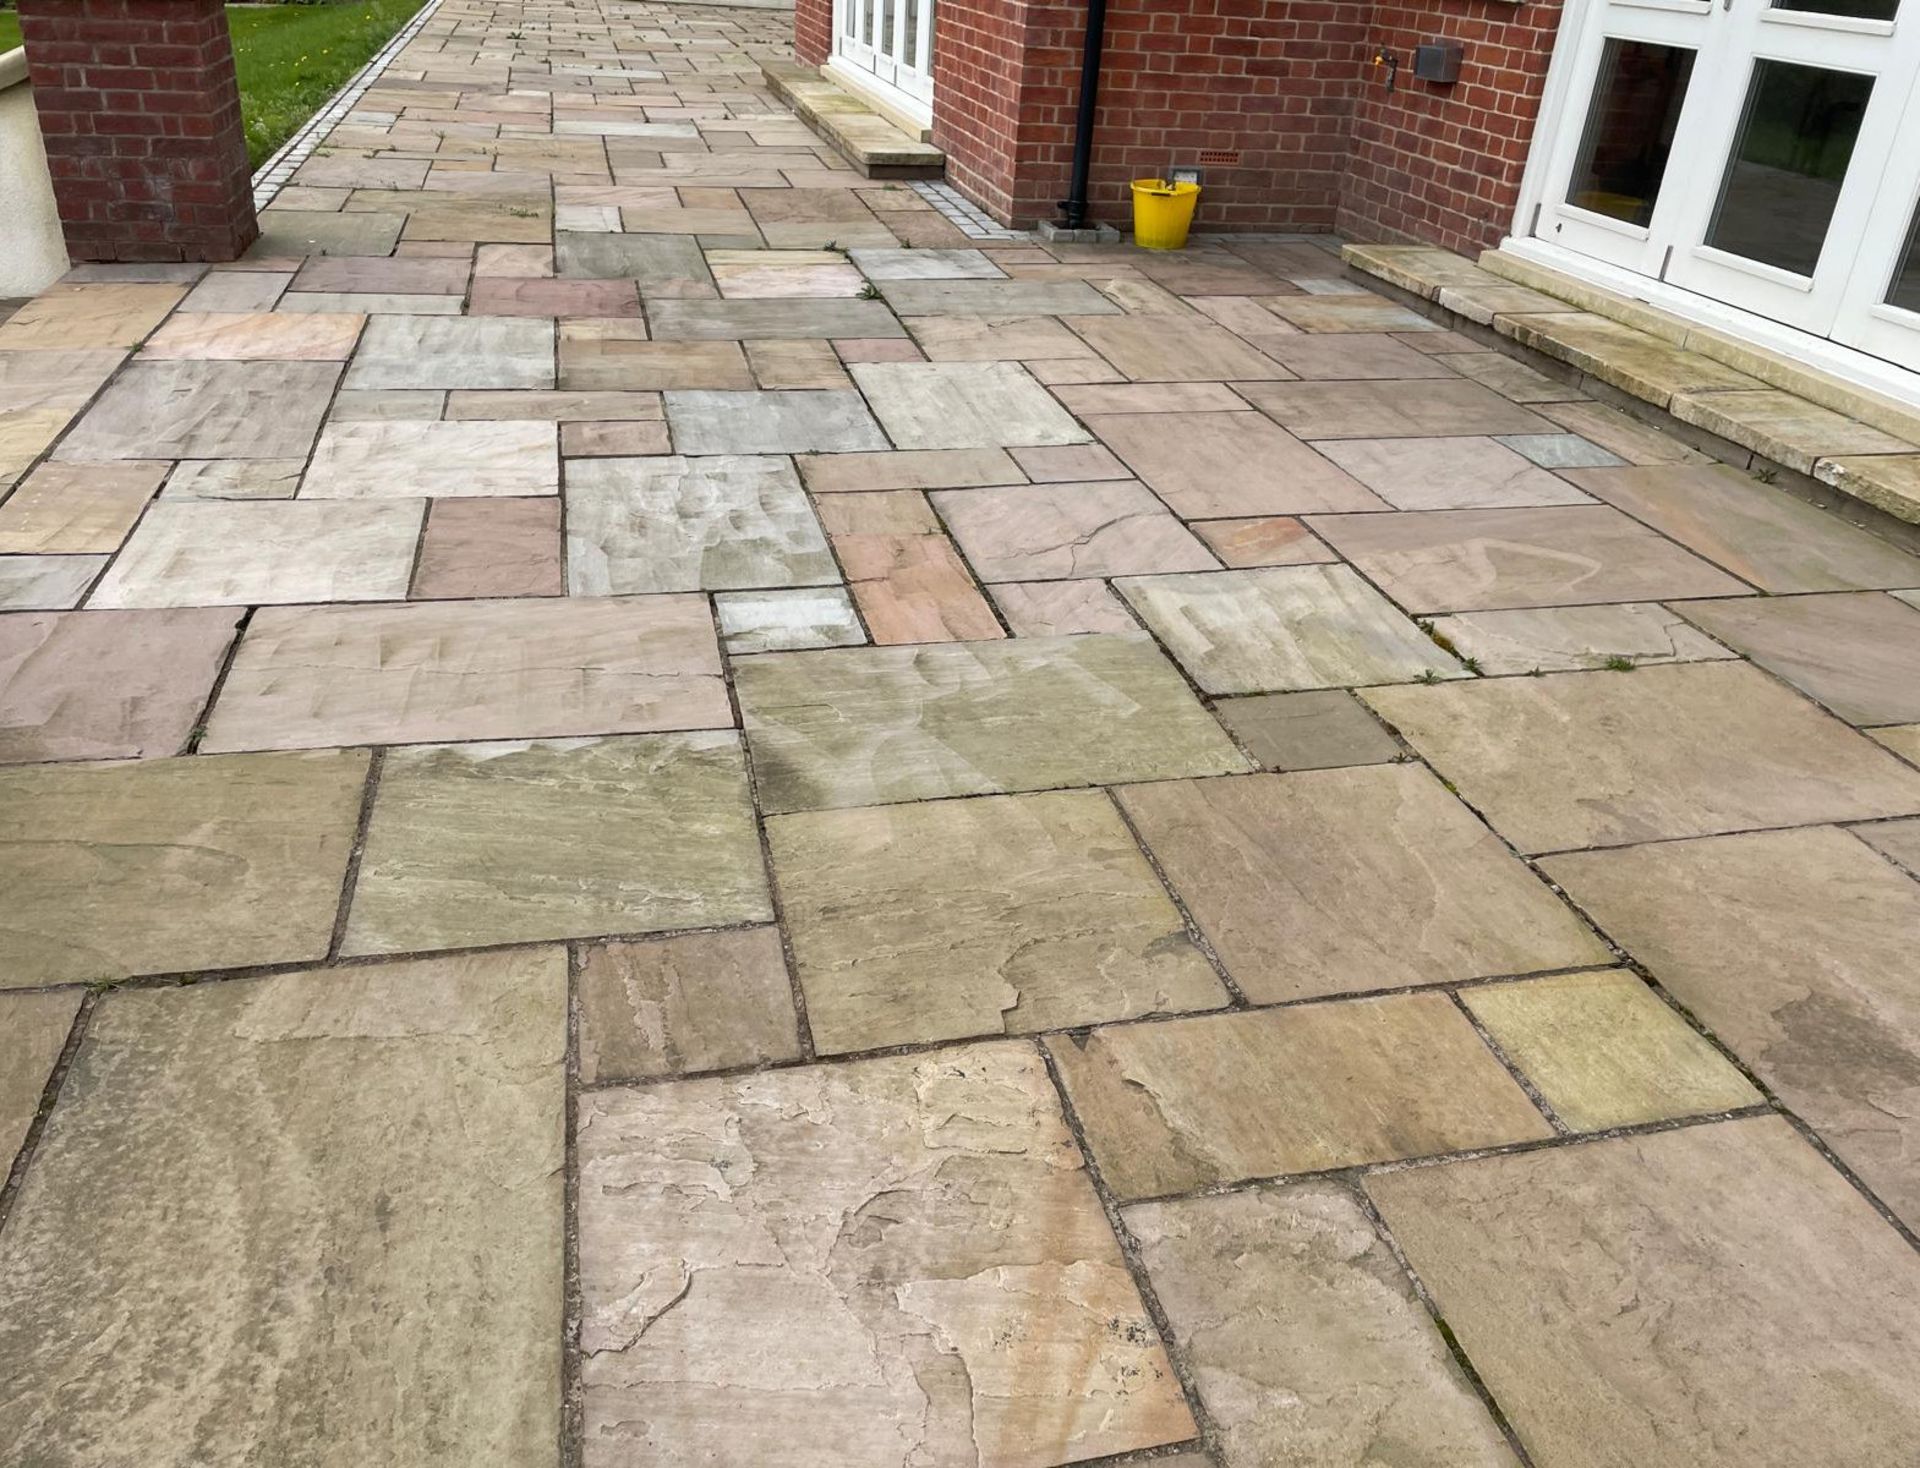 Large Quantity of Yorkstone Paving - Over 340sqm - CL896 - NO VAT ON THE HAMMER - Location: Wilmslow - Image 41 of 57